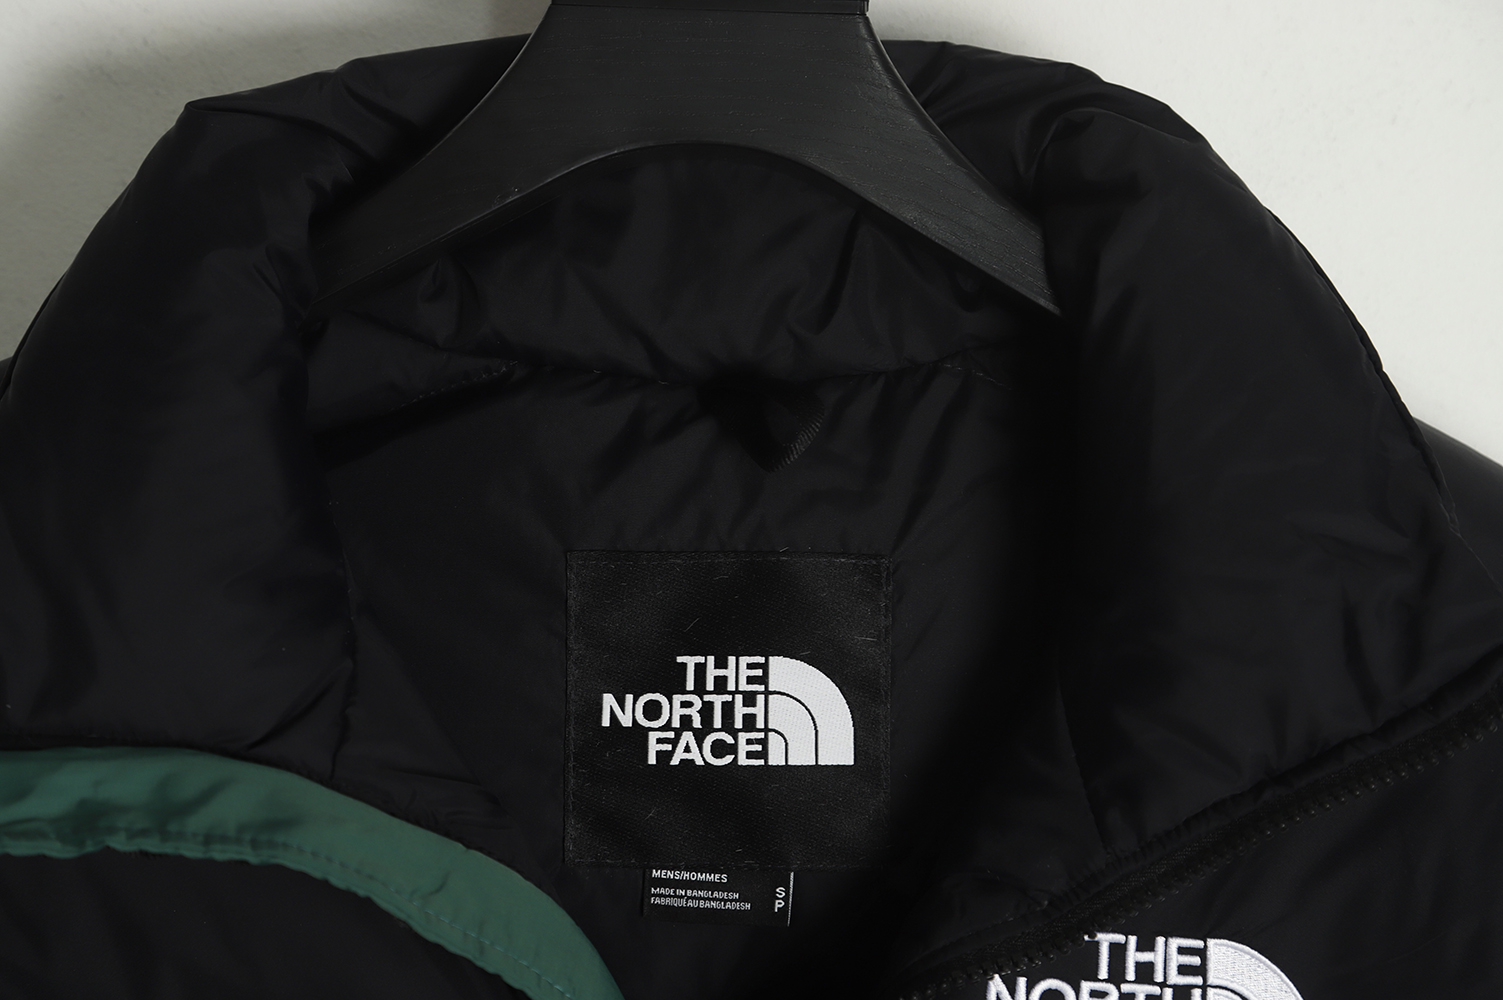 The North Face 1996 down jacket 5s version TSK6